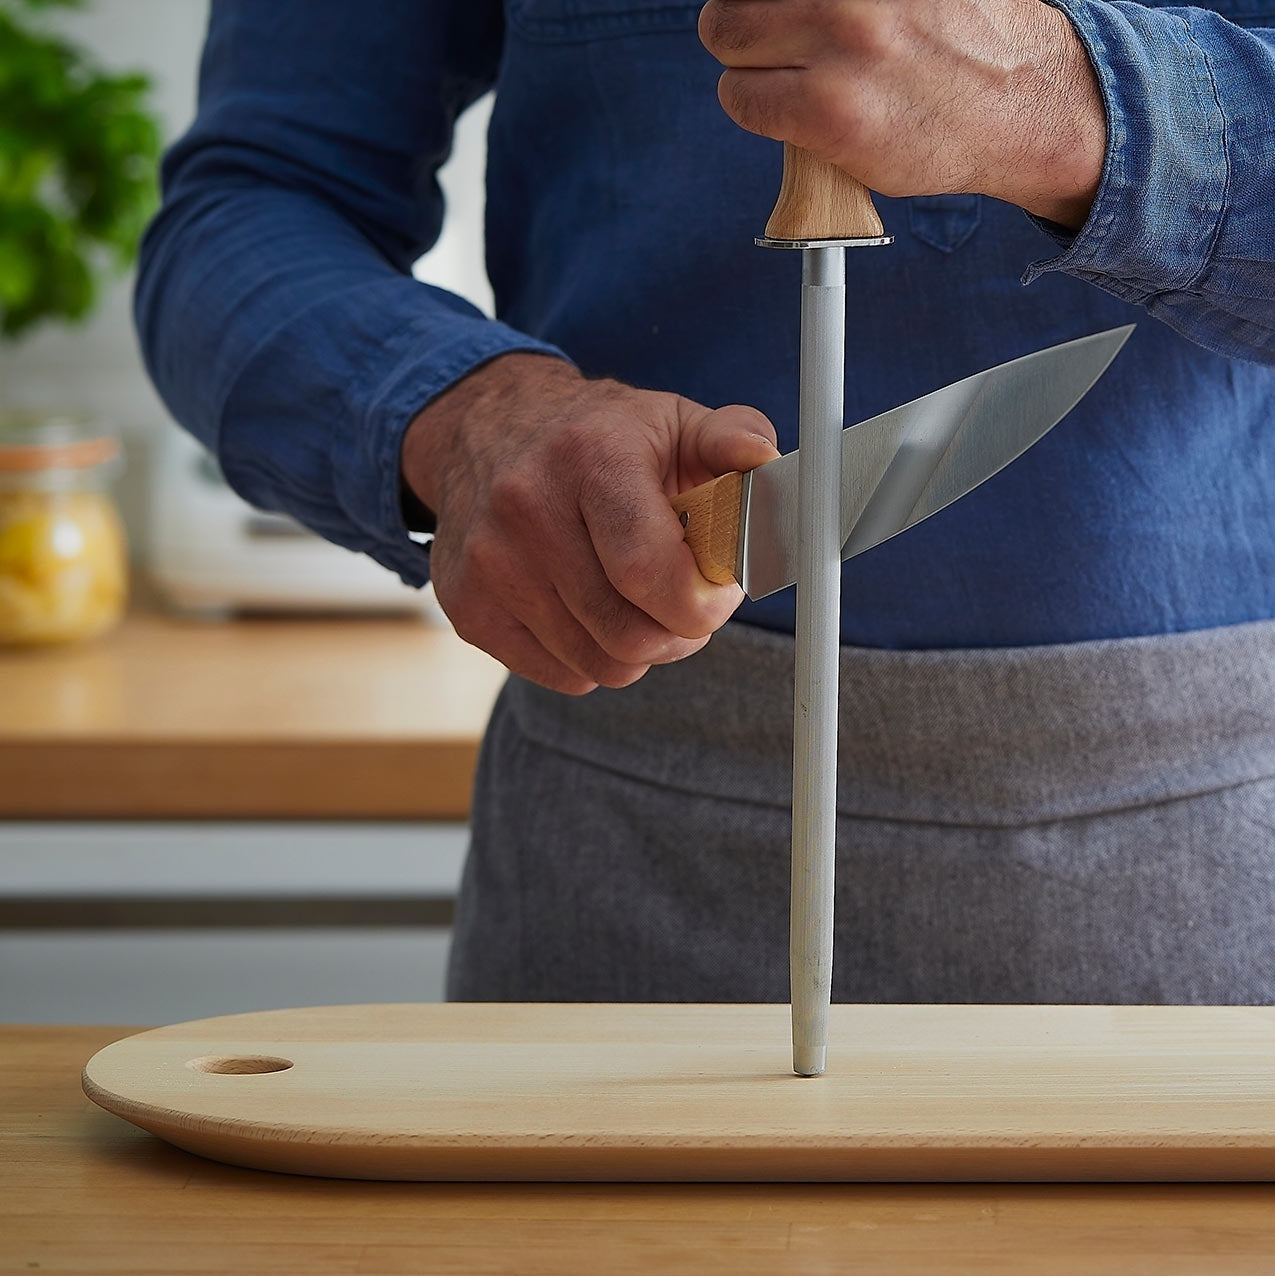 How to Sharpen a Knife? A 101, step by step guide-OPINEL USA